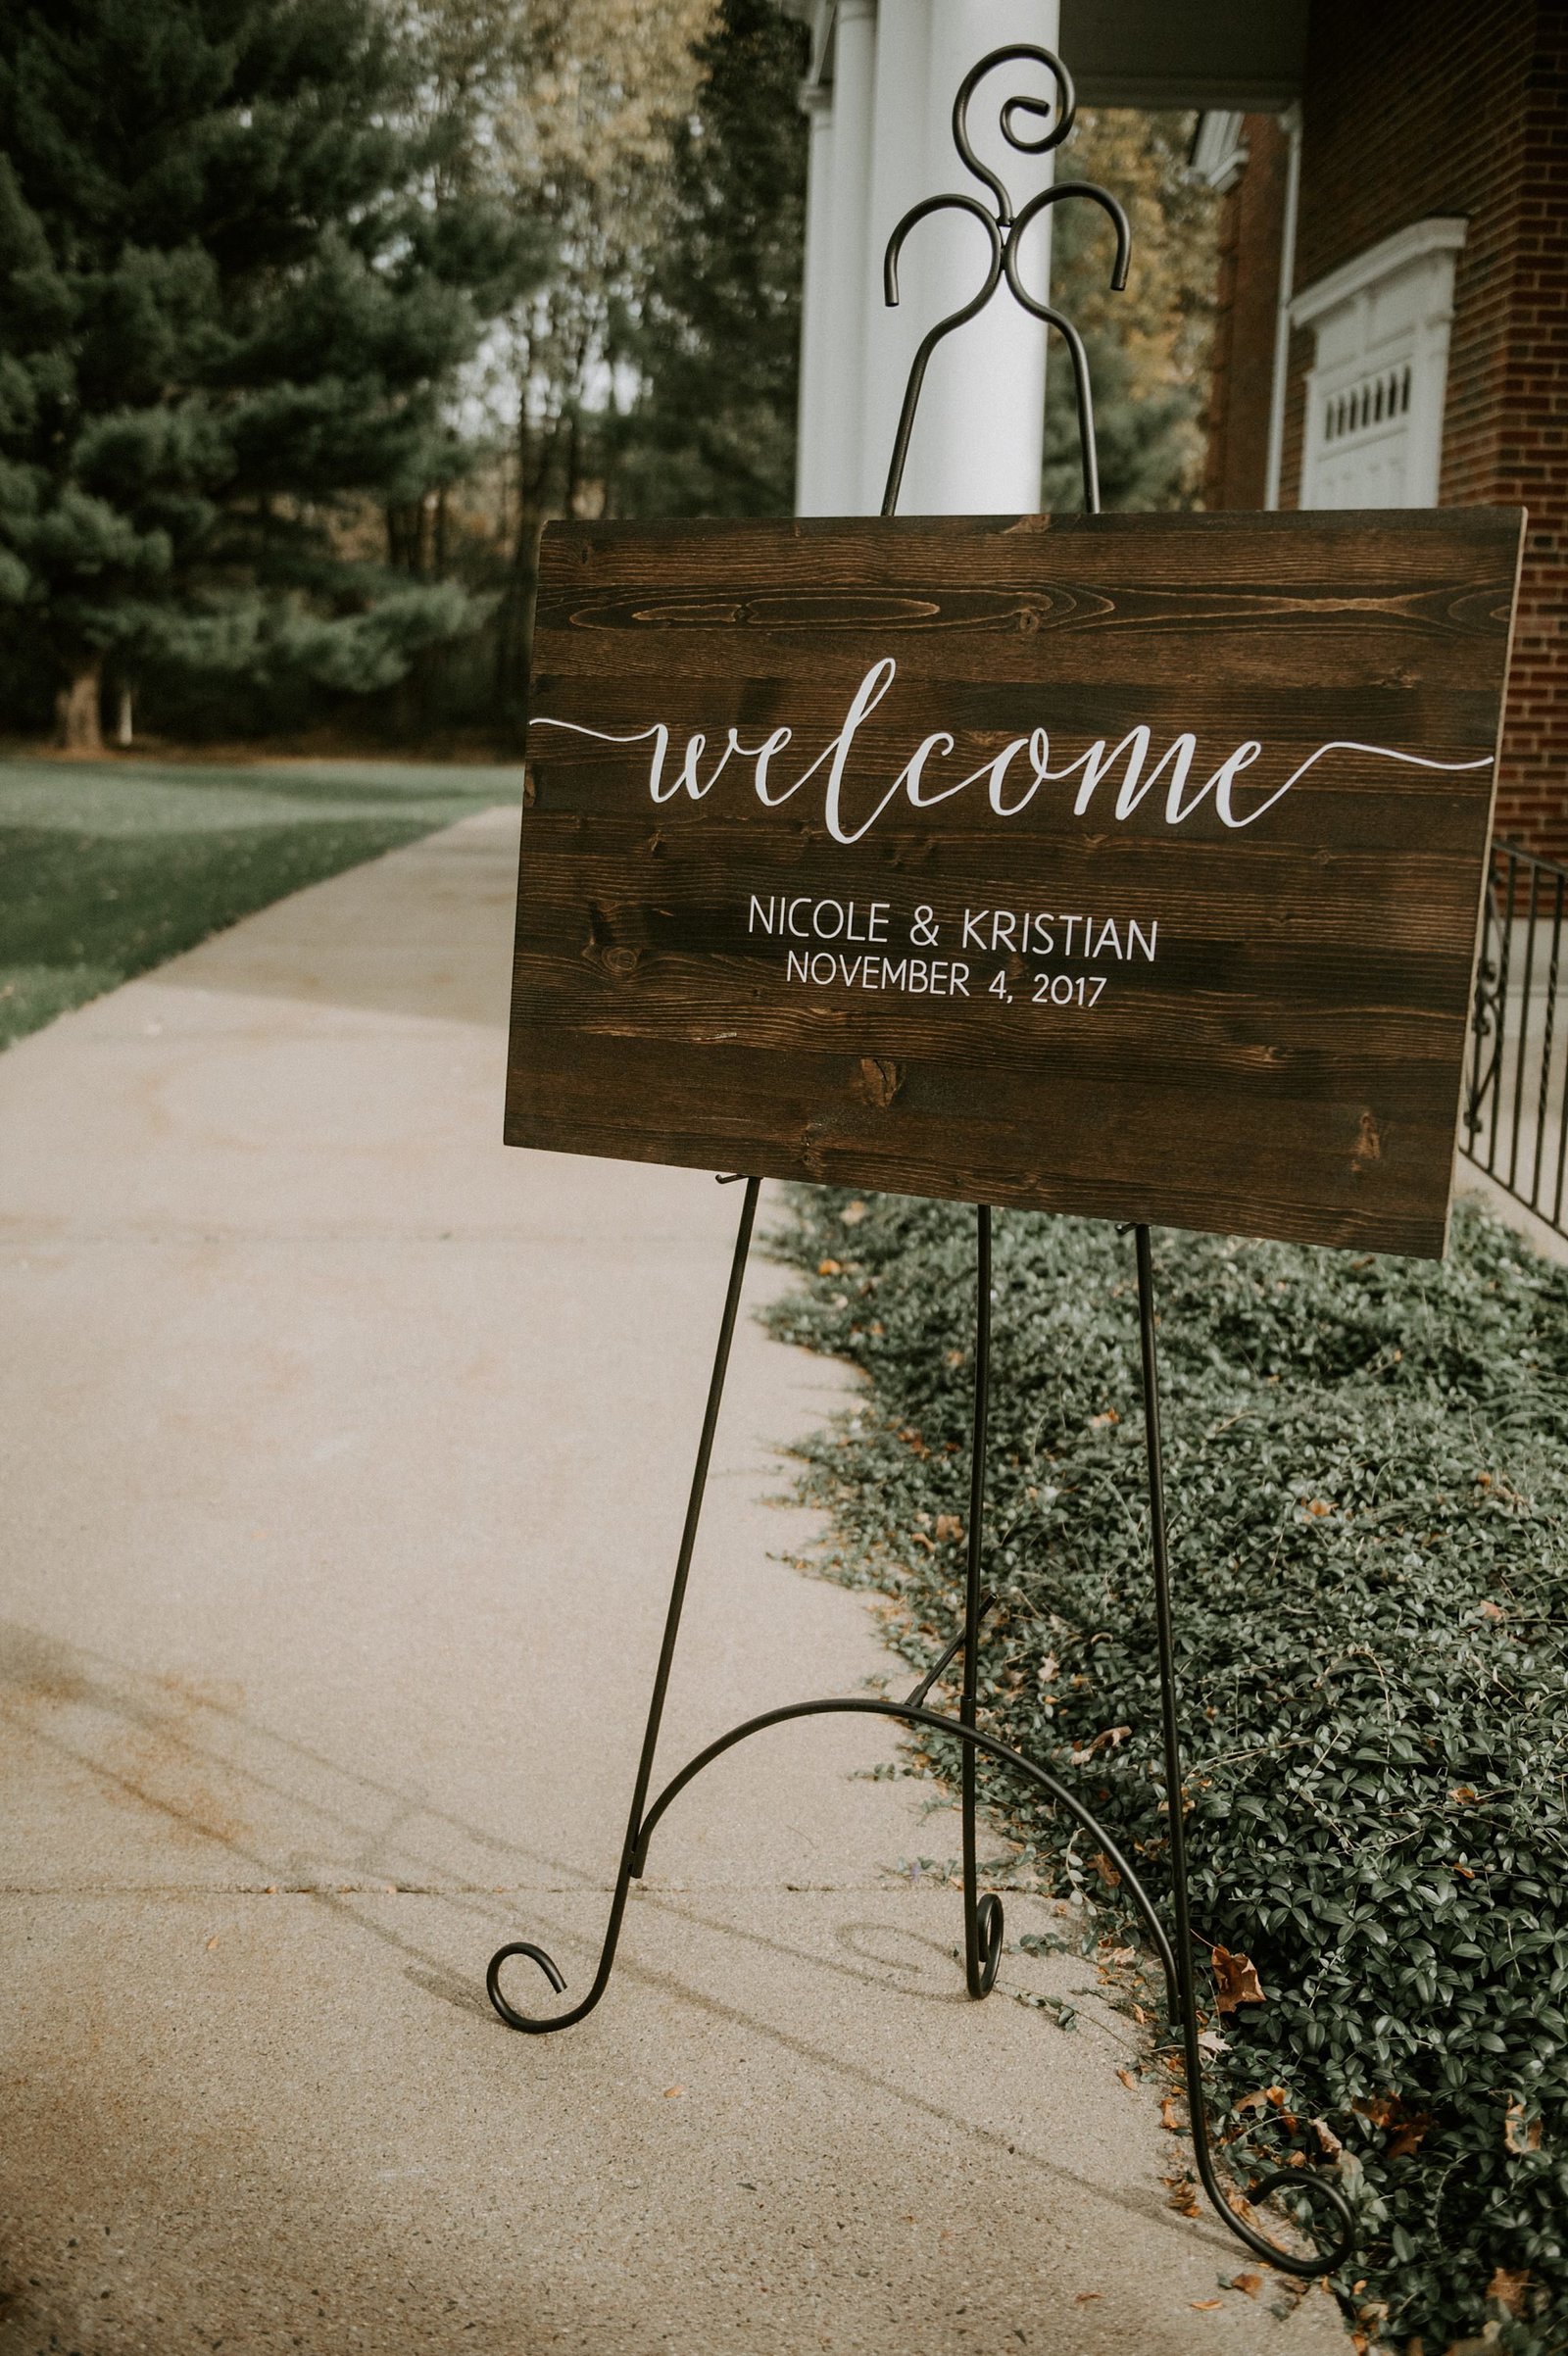 Rustic wooden ceremony welcome sign for wedding at The Webb Barn in Wethersfield, CT